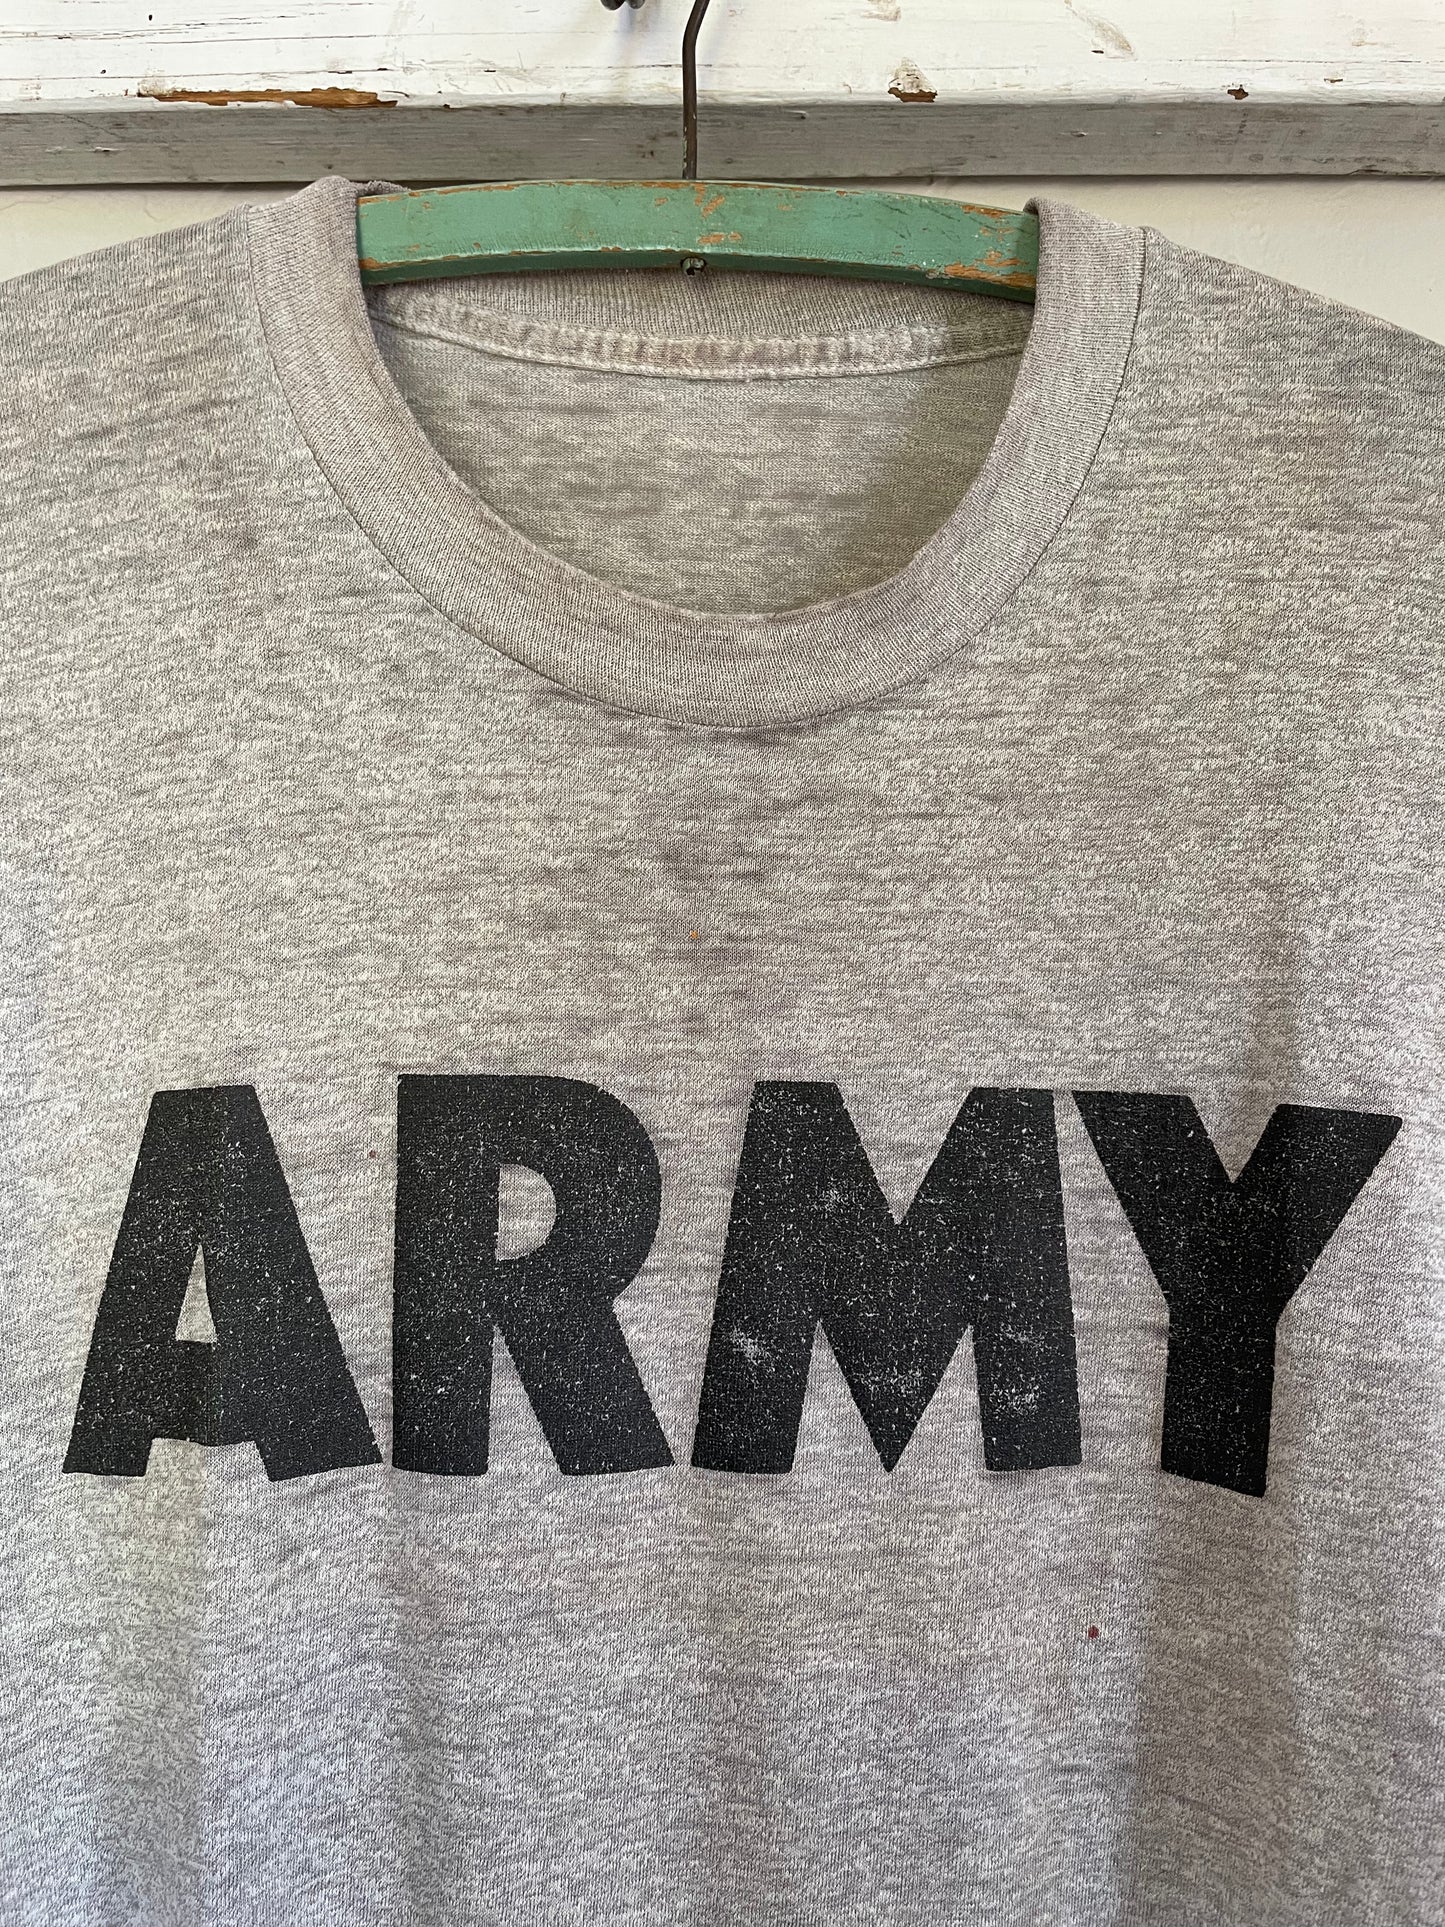 80s Paper Thin Army Tee